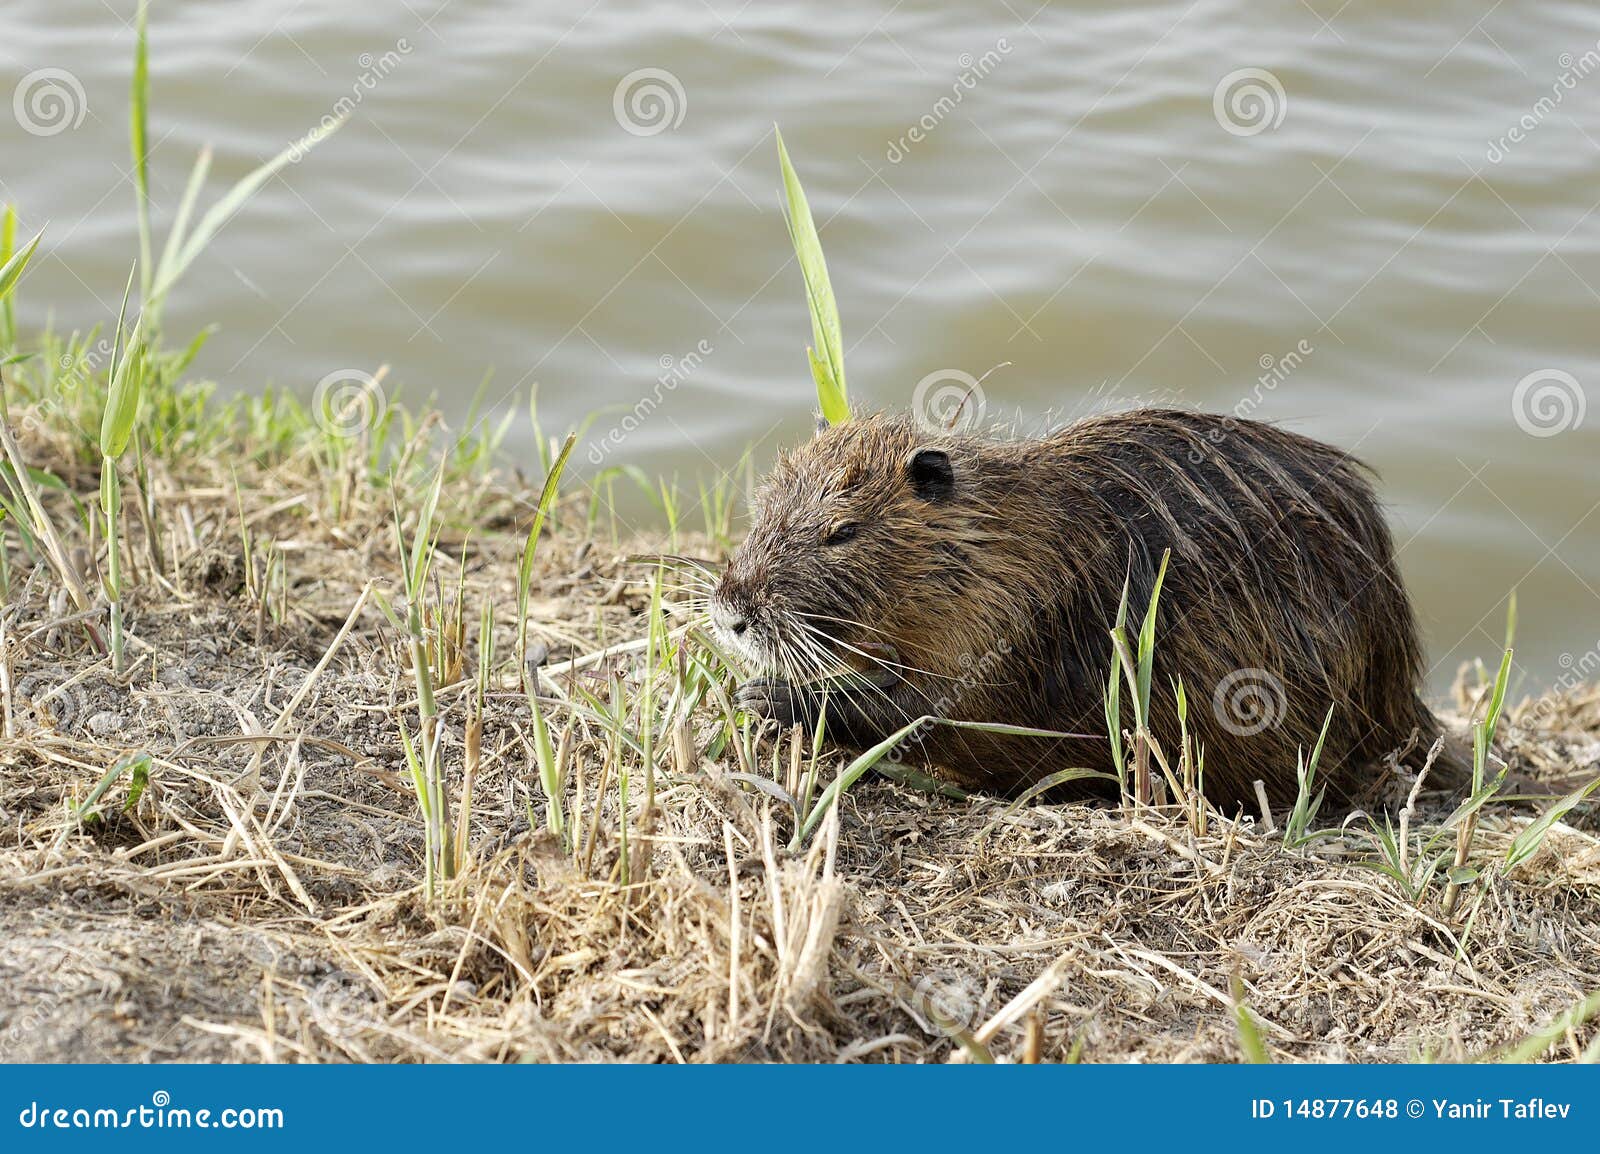 nutria - zoom out